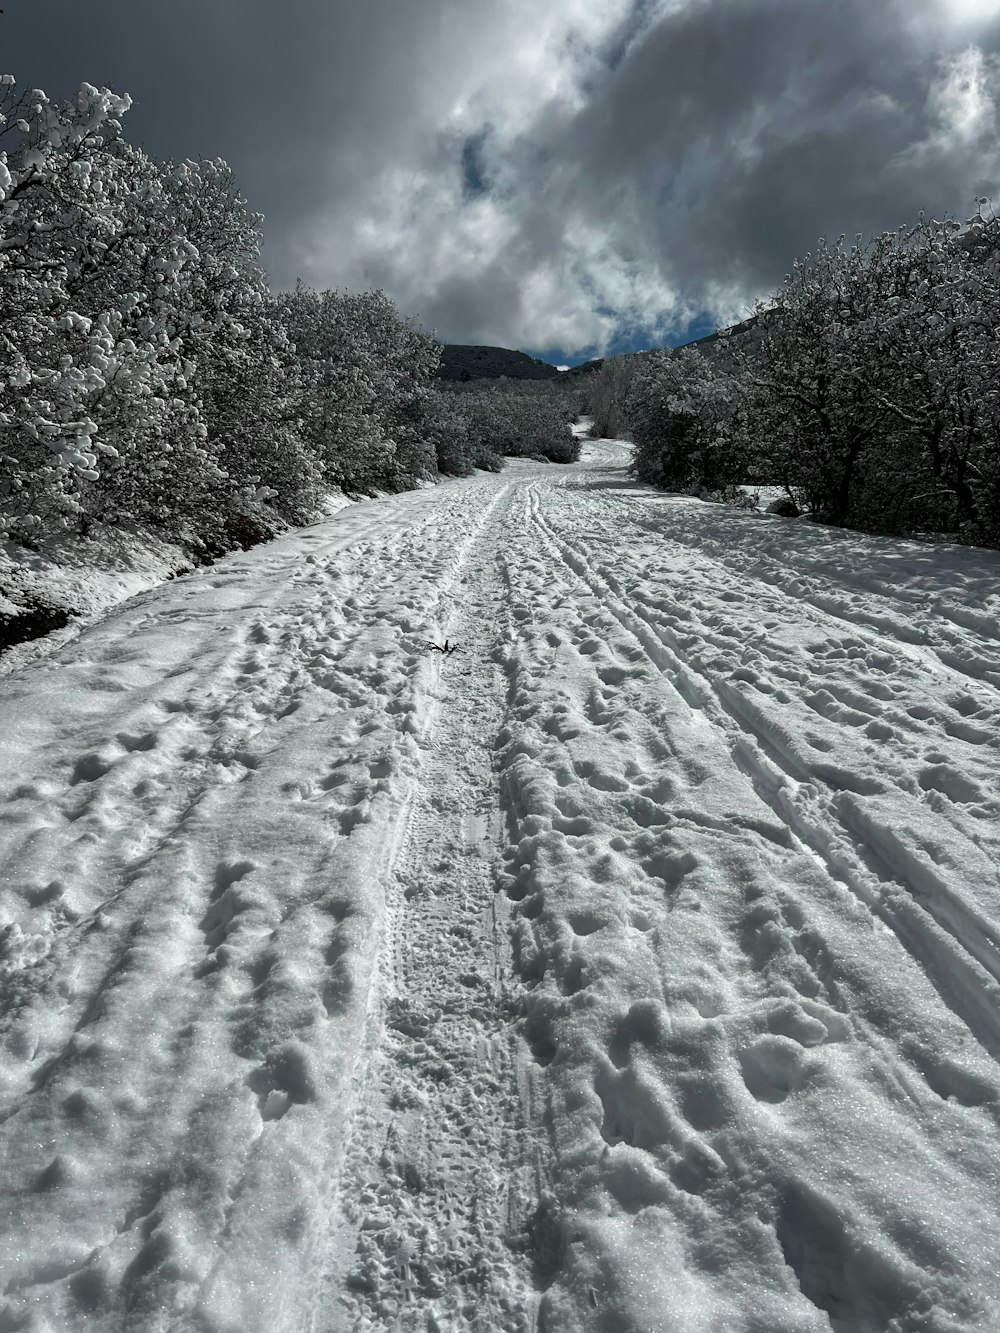 a snow covered road surrounded by trees under a cloudy sky